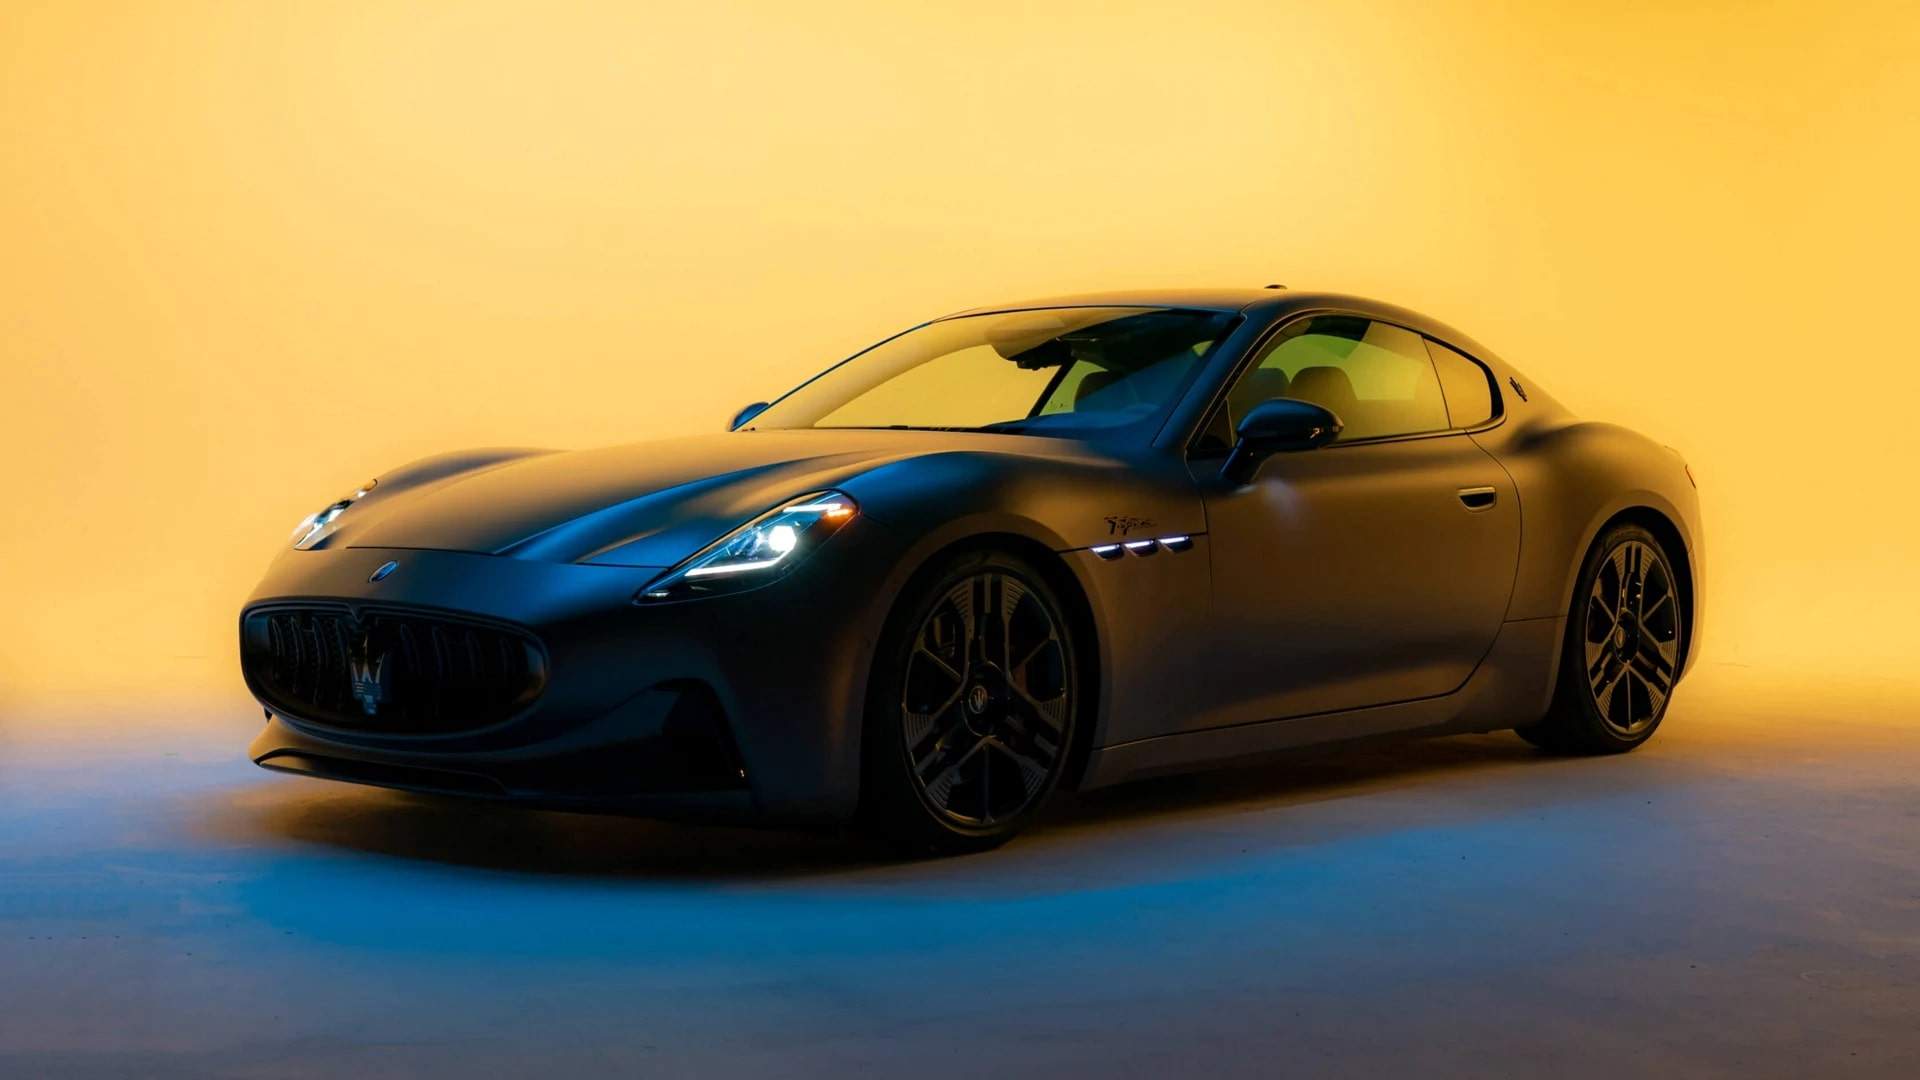 Maserati GranTurismo was discontinued in 2019, but it’s now back on the market again. Photos: Maserati